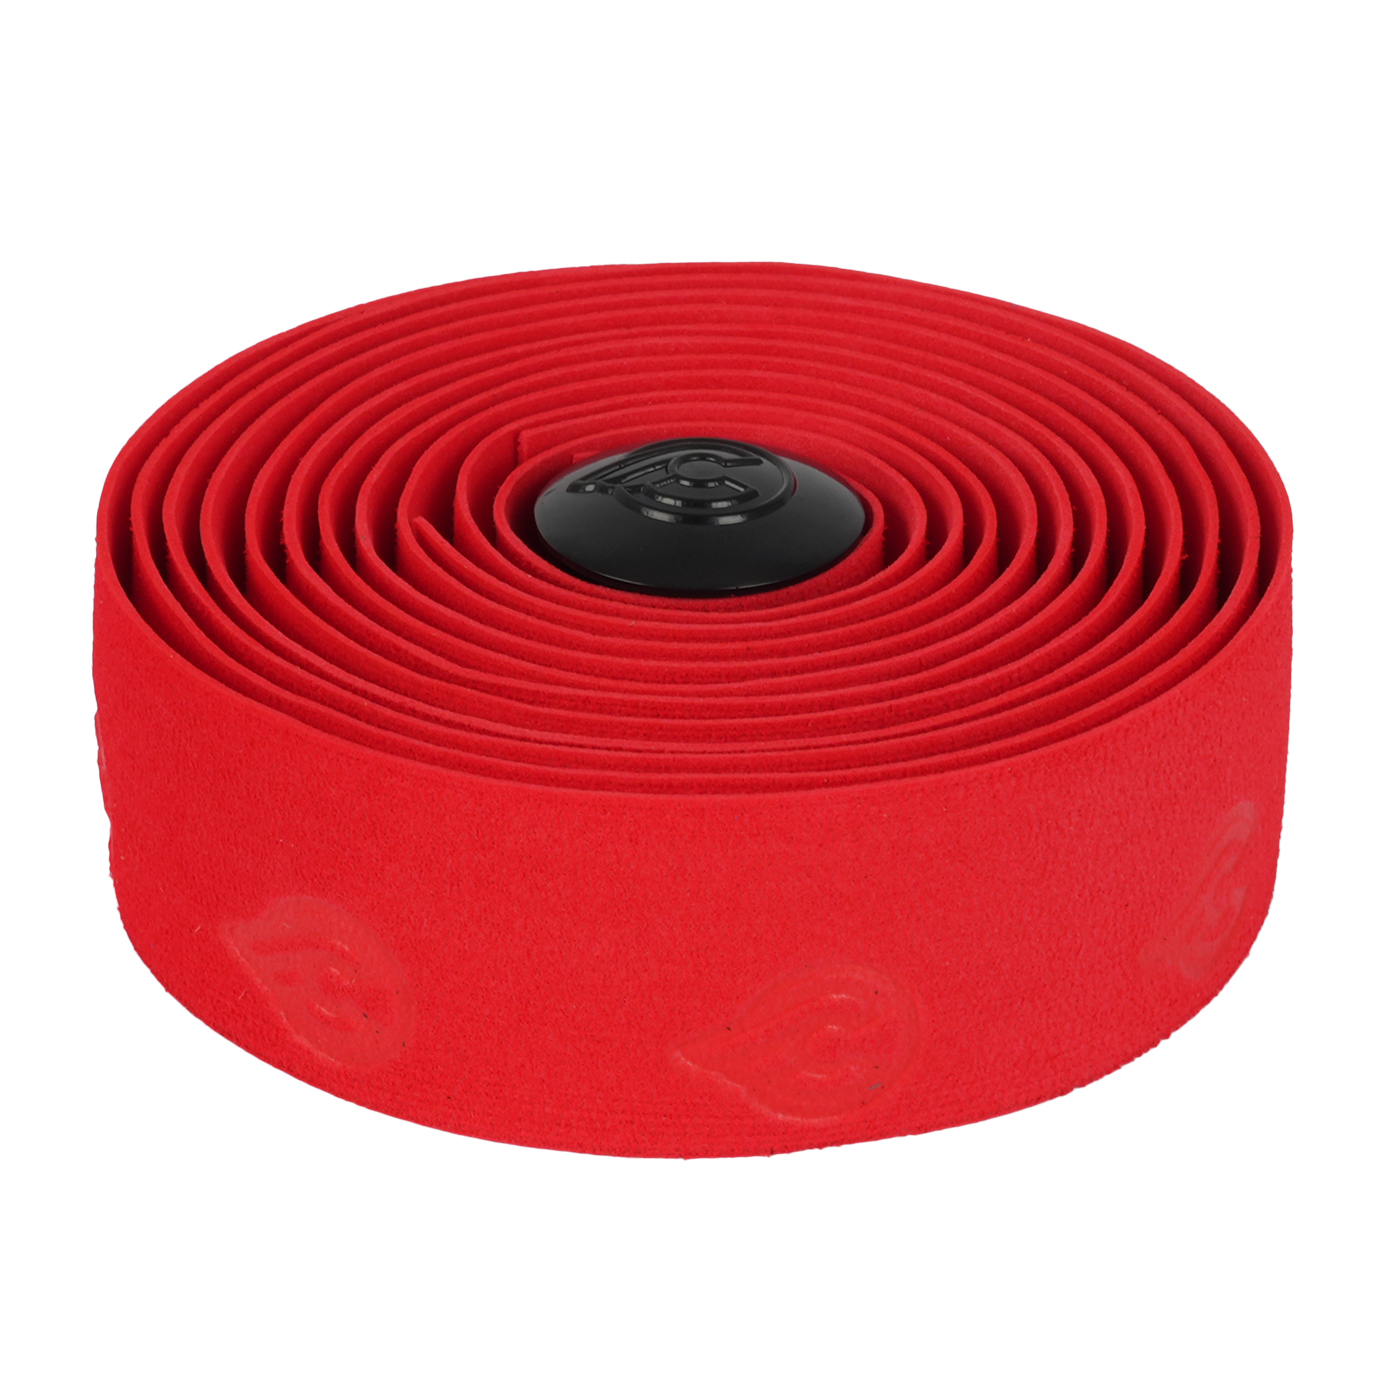 Picture of Cinelli Wave - Handlebar Tape - red